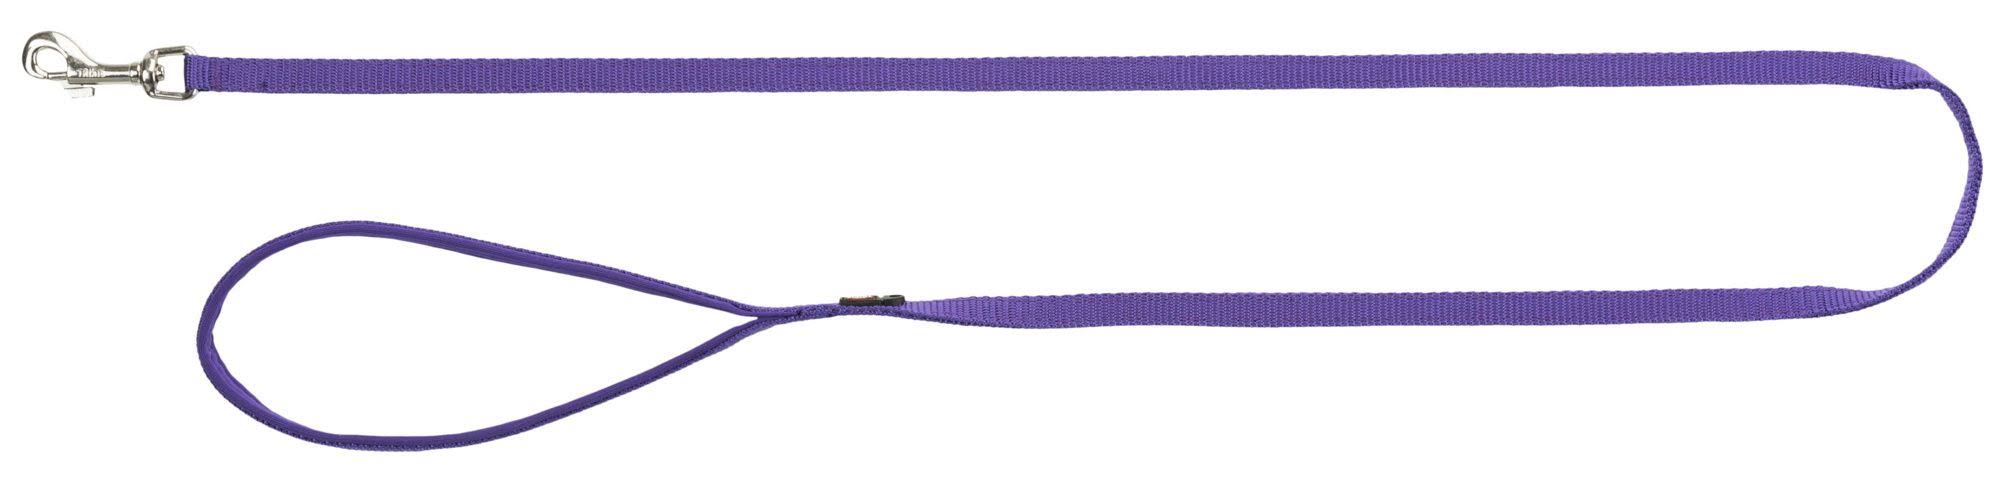 Trixie Premium Leash For Dogs Violet - Extra Small - 1.20 m/10 mm